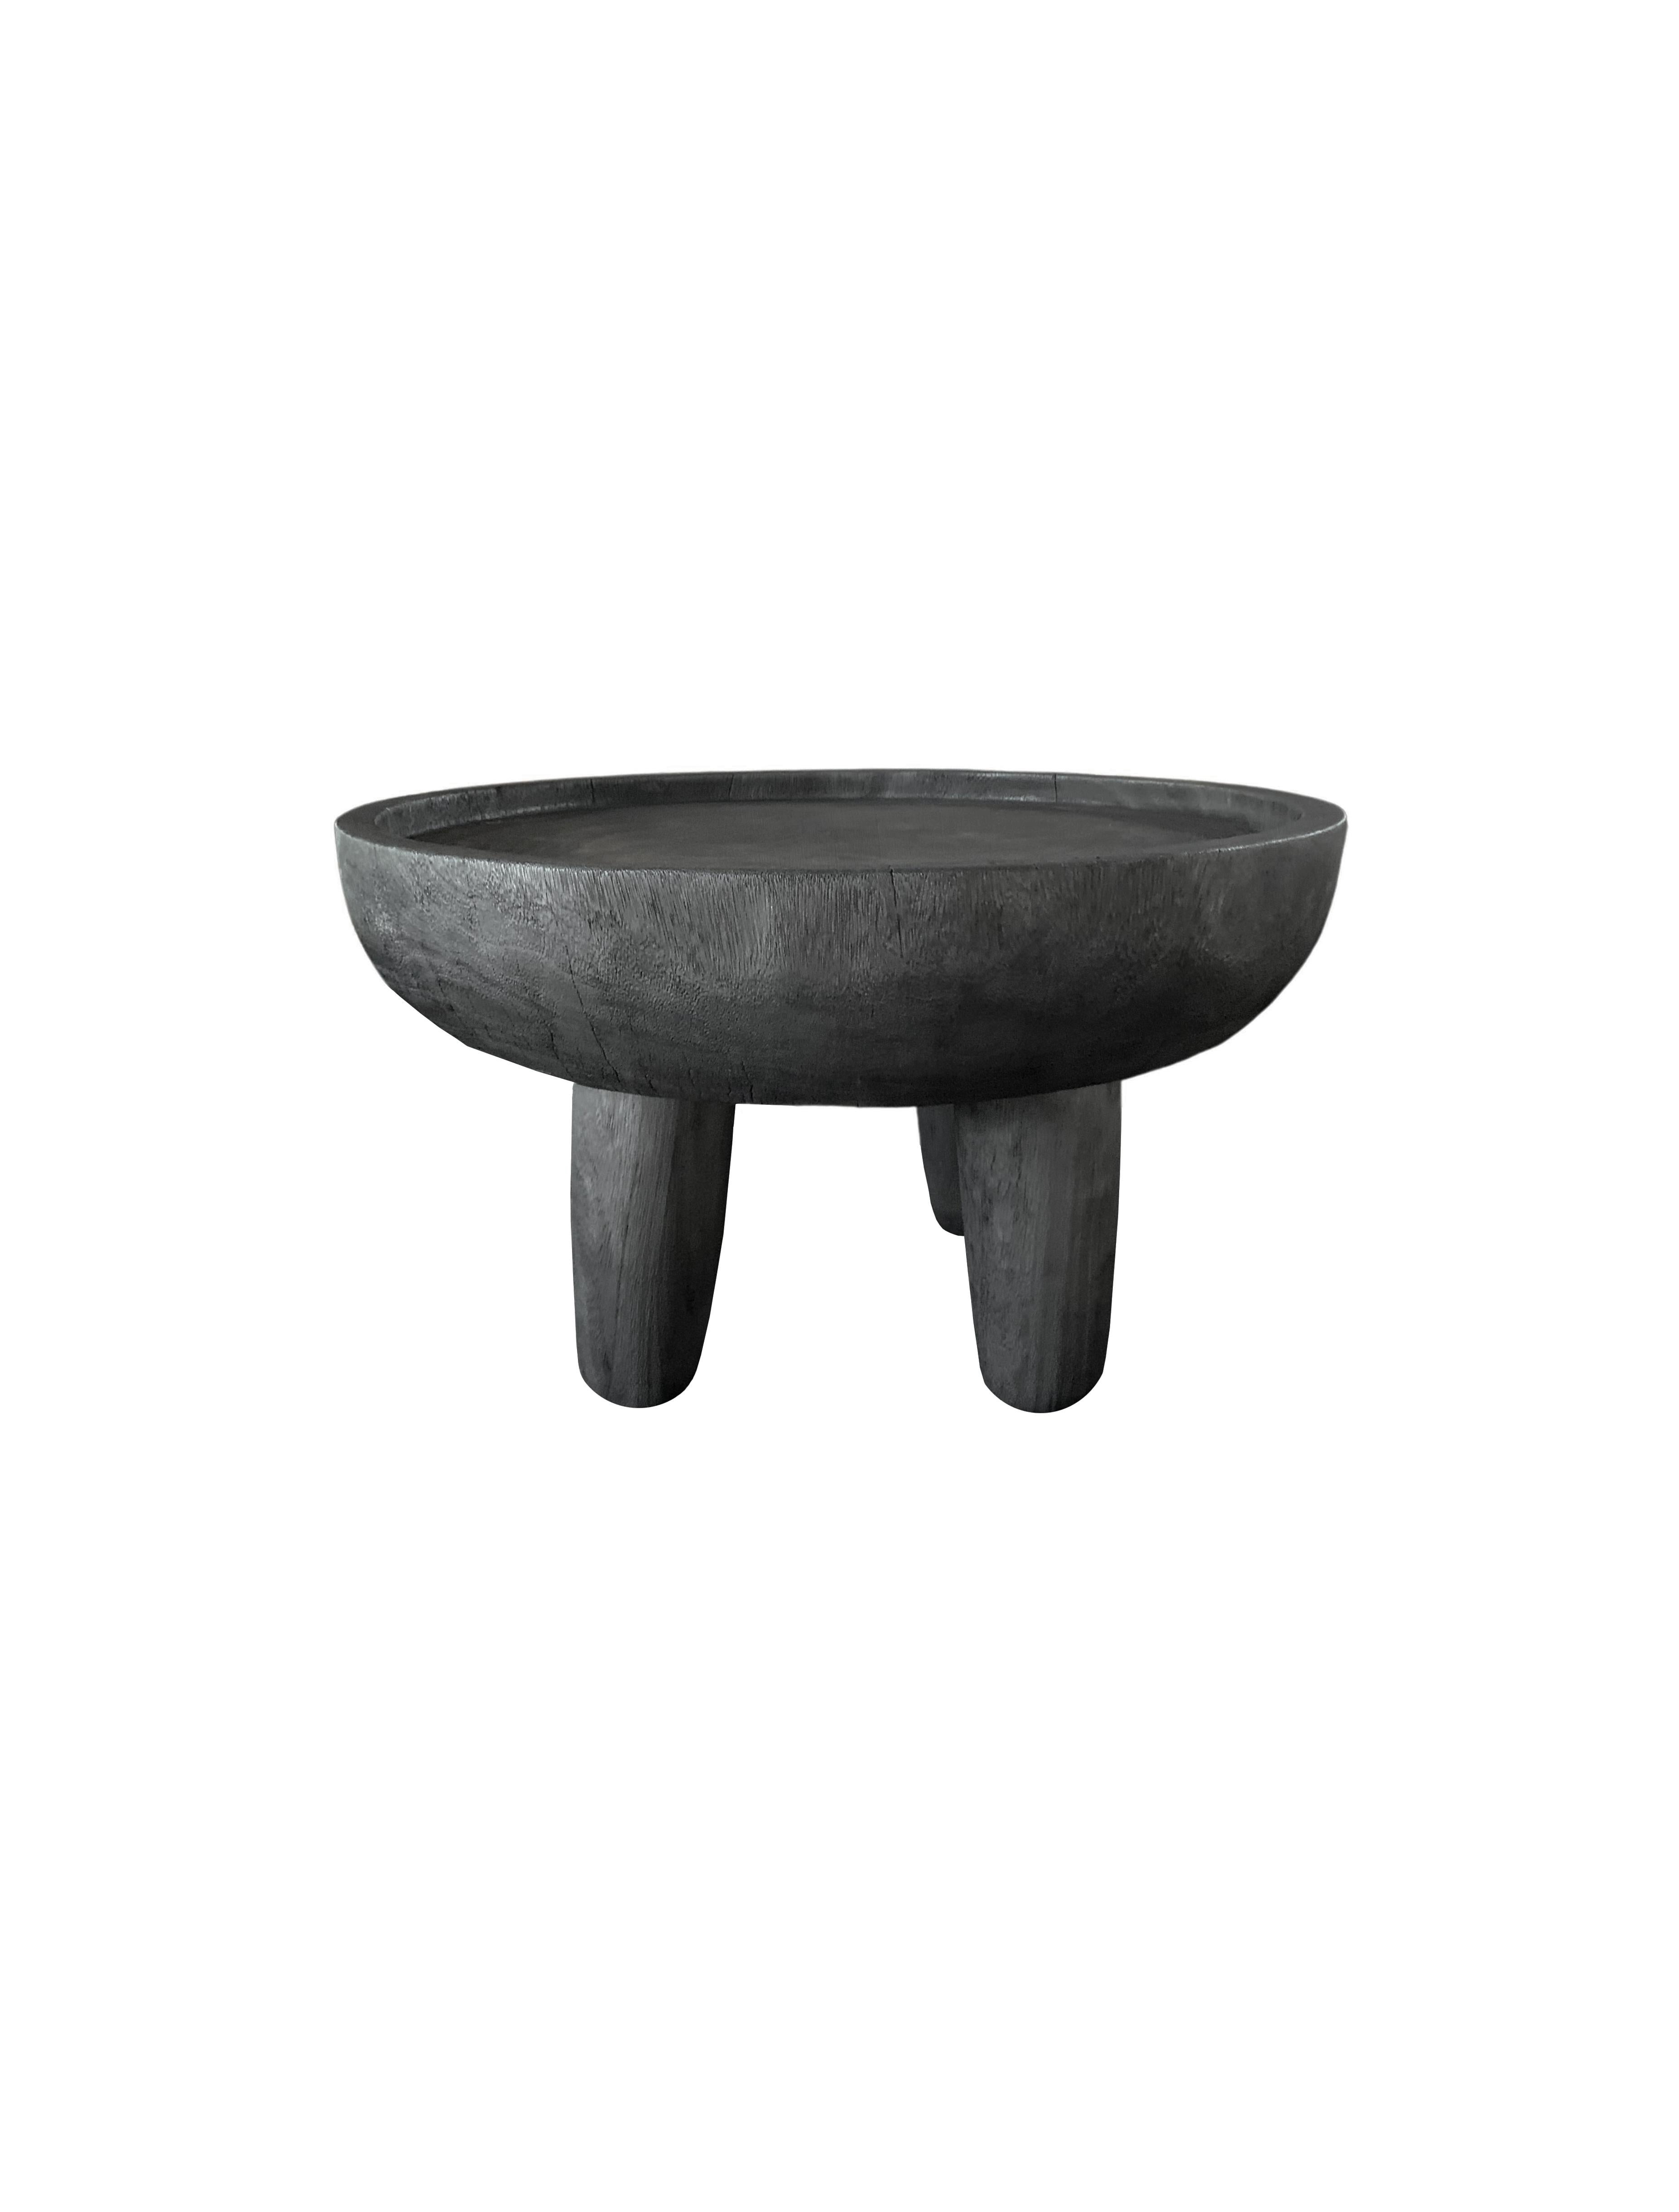 A wonderfully sculptural round side table. Its rich black pigment was achieved through burning the wood three times. Its neutral pigment and subtle wood texture makes it perfect for any space. A uniquely sculptural and versatile piece. This table